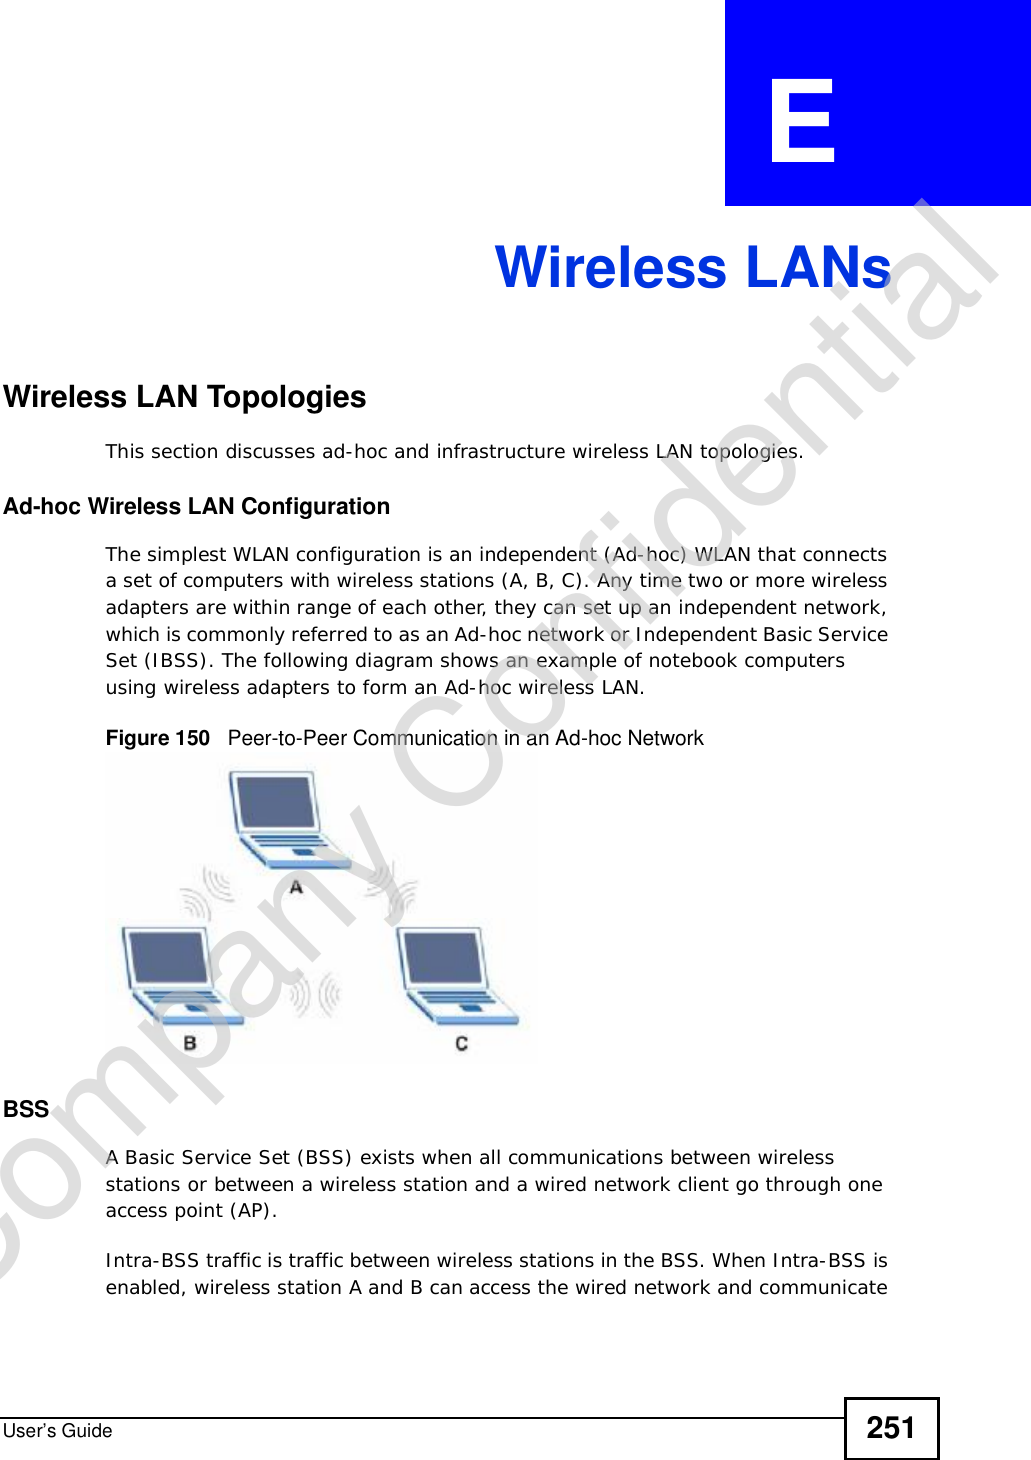 User’s Guide 251APPENDIX  E Wireless LANsWireless LAN TopologiesThis section discusses ad-hoc and infrastructure wireless LAN topologies.Ad-hoc Wireless LAN ConfigurationThe simplest WLAN configuration is an independent (Ad-hoc) WLAN that connects a set of computers with wireless stations (A, B, C). Any time two or more wireless adapters are within range of each other, they can set up an independent network, which is commonly referred to as an Ad-hoc network or Independent Basic Service Set (IBSS). The following diagram shows an example of notebook computers using wireless adapters to form an Ad-hoc wireless LAN. Figure 150   Peer-to-Peer Communication in an Ad-hoc NetworkBSSA Basic Service Set (BSS) exists when all communications between wireless stations or between a wireless station and a wired network client go through one access point (AP). Intra-BSS traffic is traffic between wireless stations in the BSS. When Intra-BSS is enabled, wireless station A and B can access the wired network and communicate Company Confidential